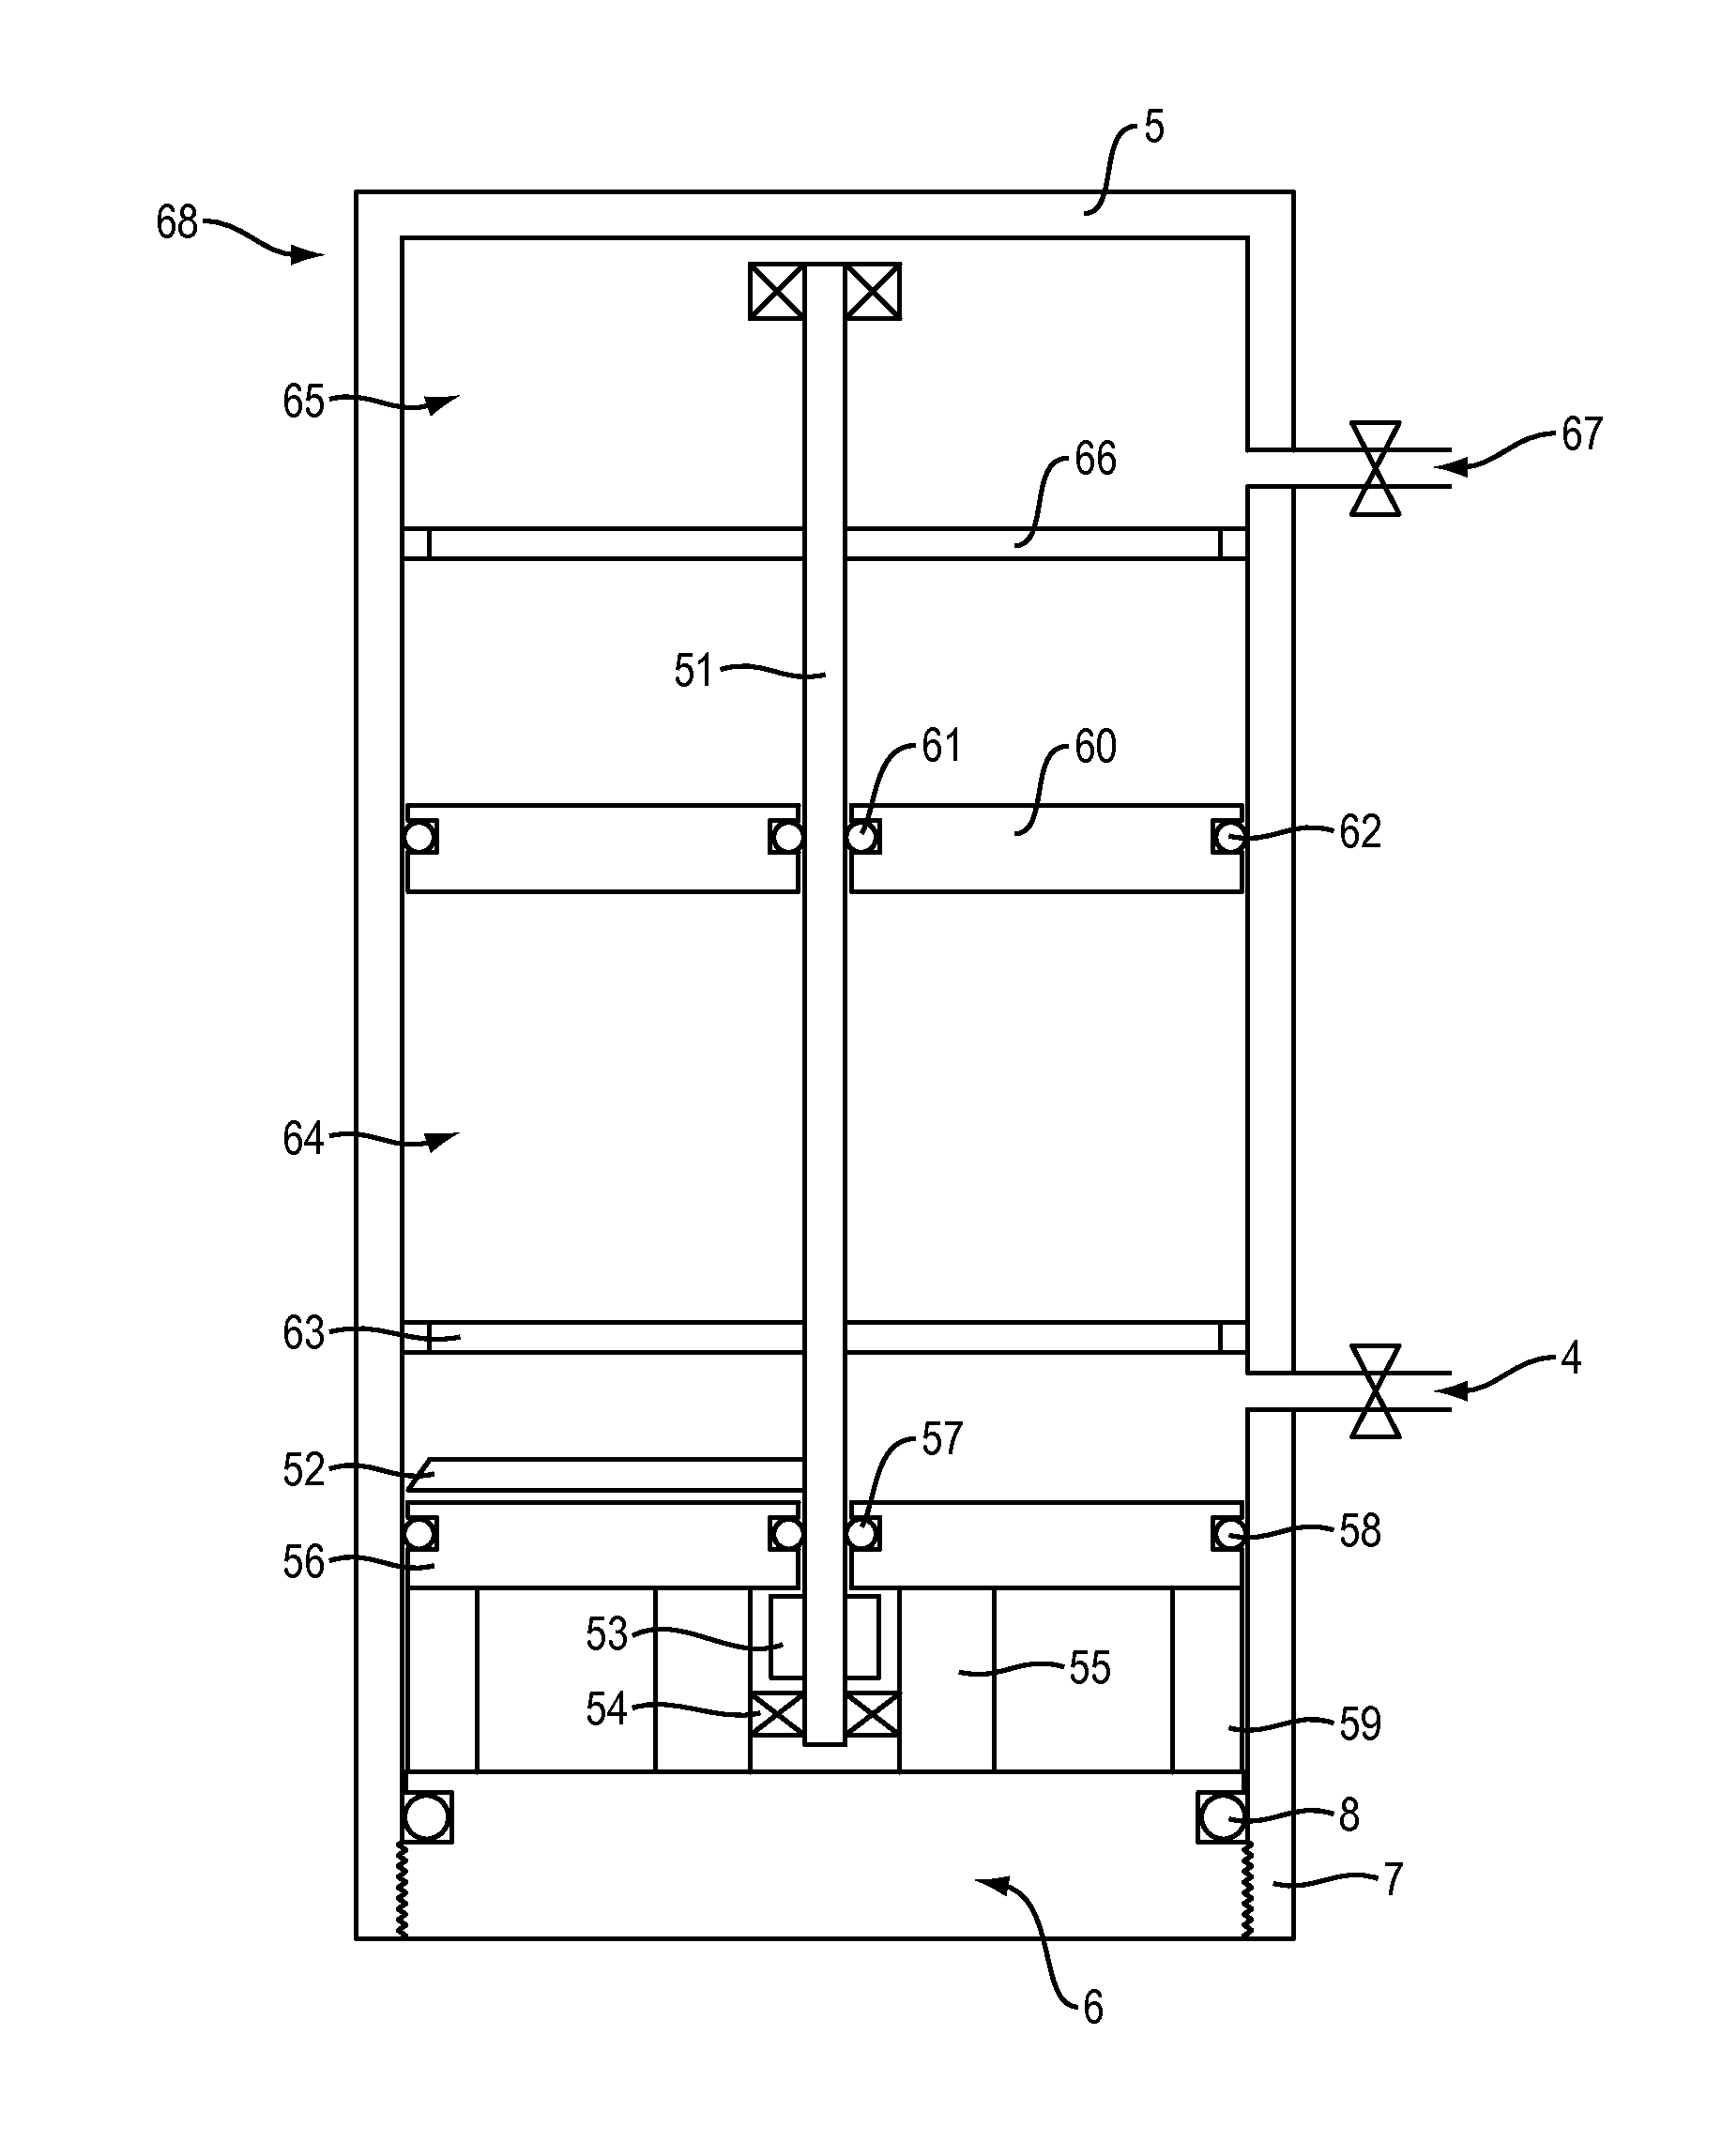 System and Method for Renewable Fuel Using Sealed Reaction Chambers